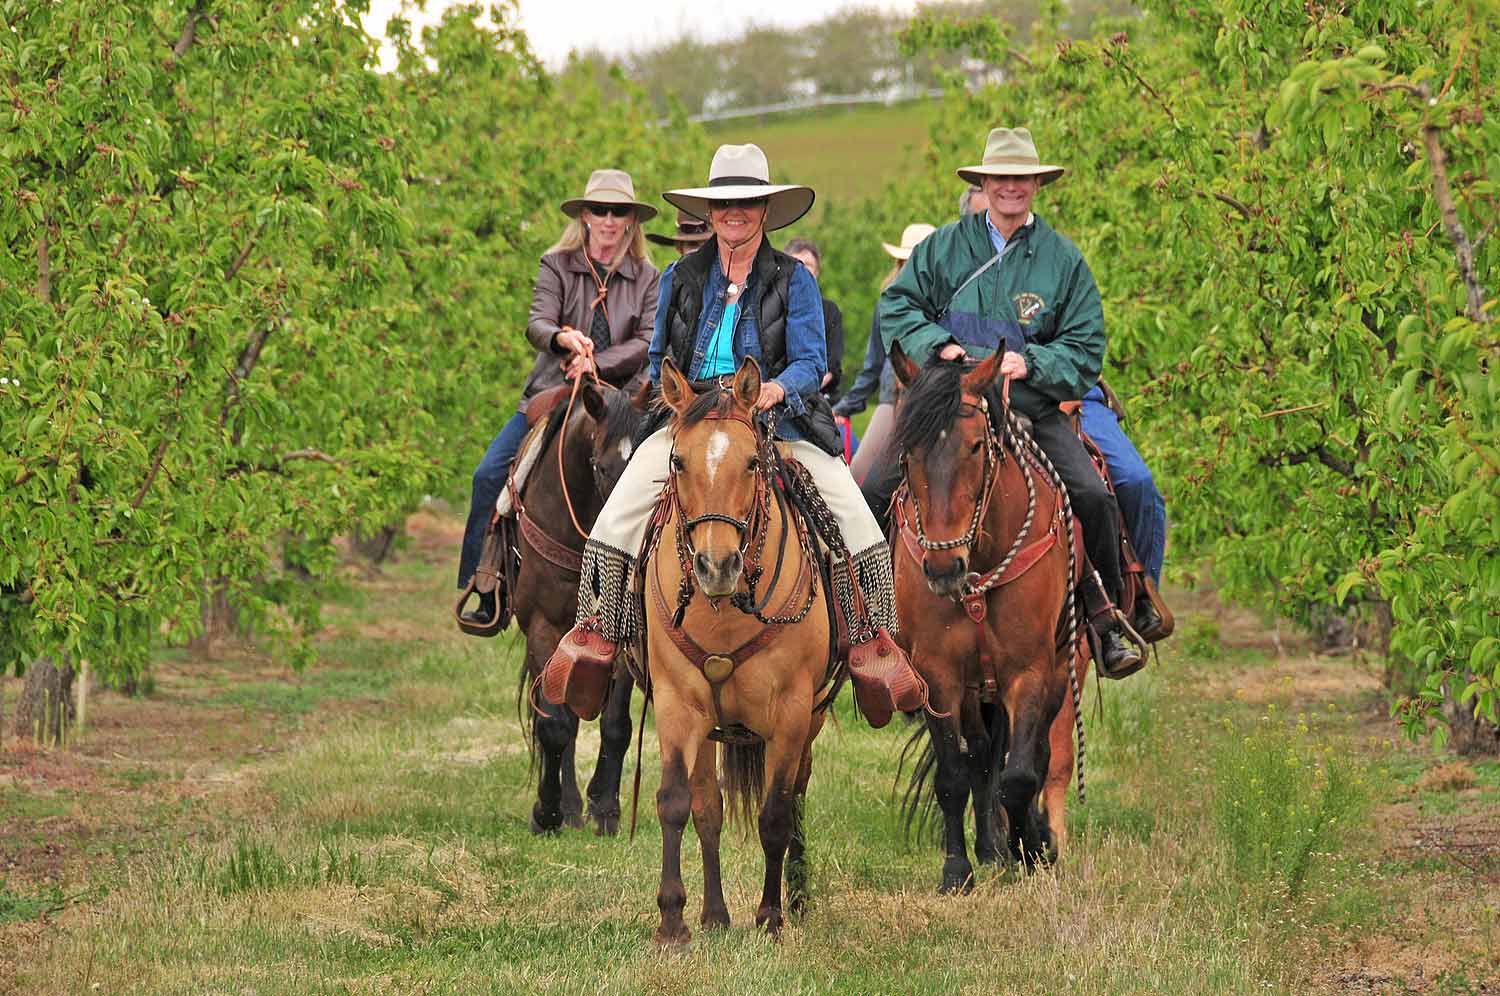 Hoof it through the wine country with Trail Boss Tiffany Fewel as your guide. Ride through the sun-soaked vineyards surrounding Cherry Wood, stop for tastings at two selected wineries and enjoy a gourmet picnic-style lunch at Cultura Winery